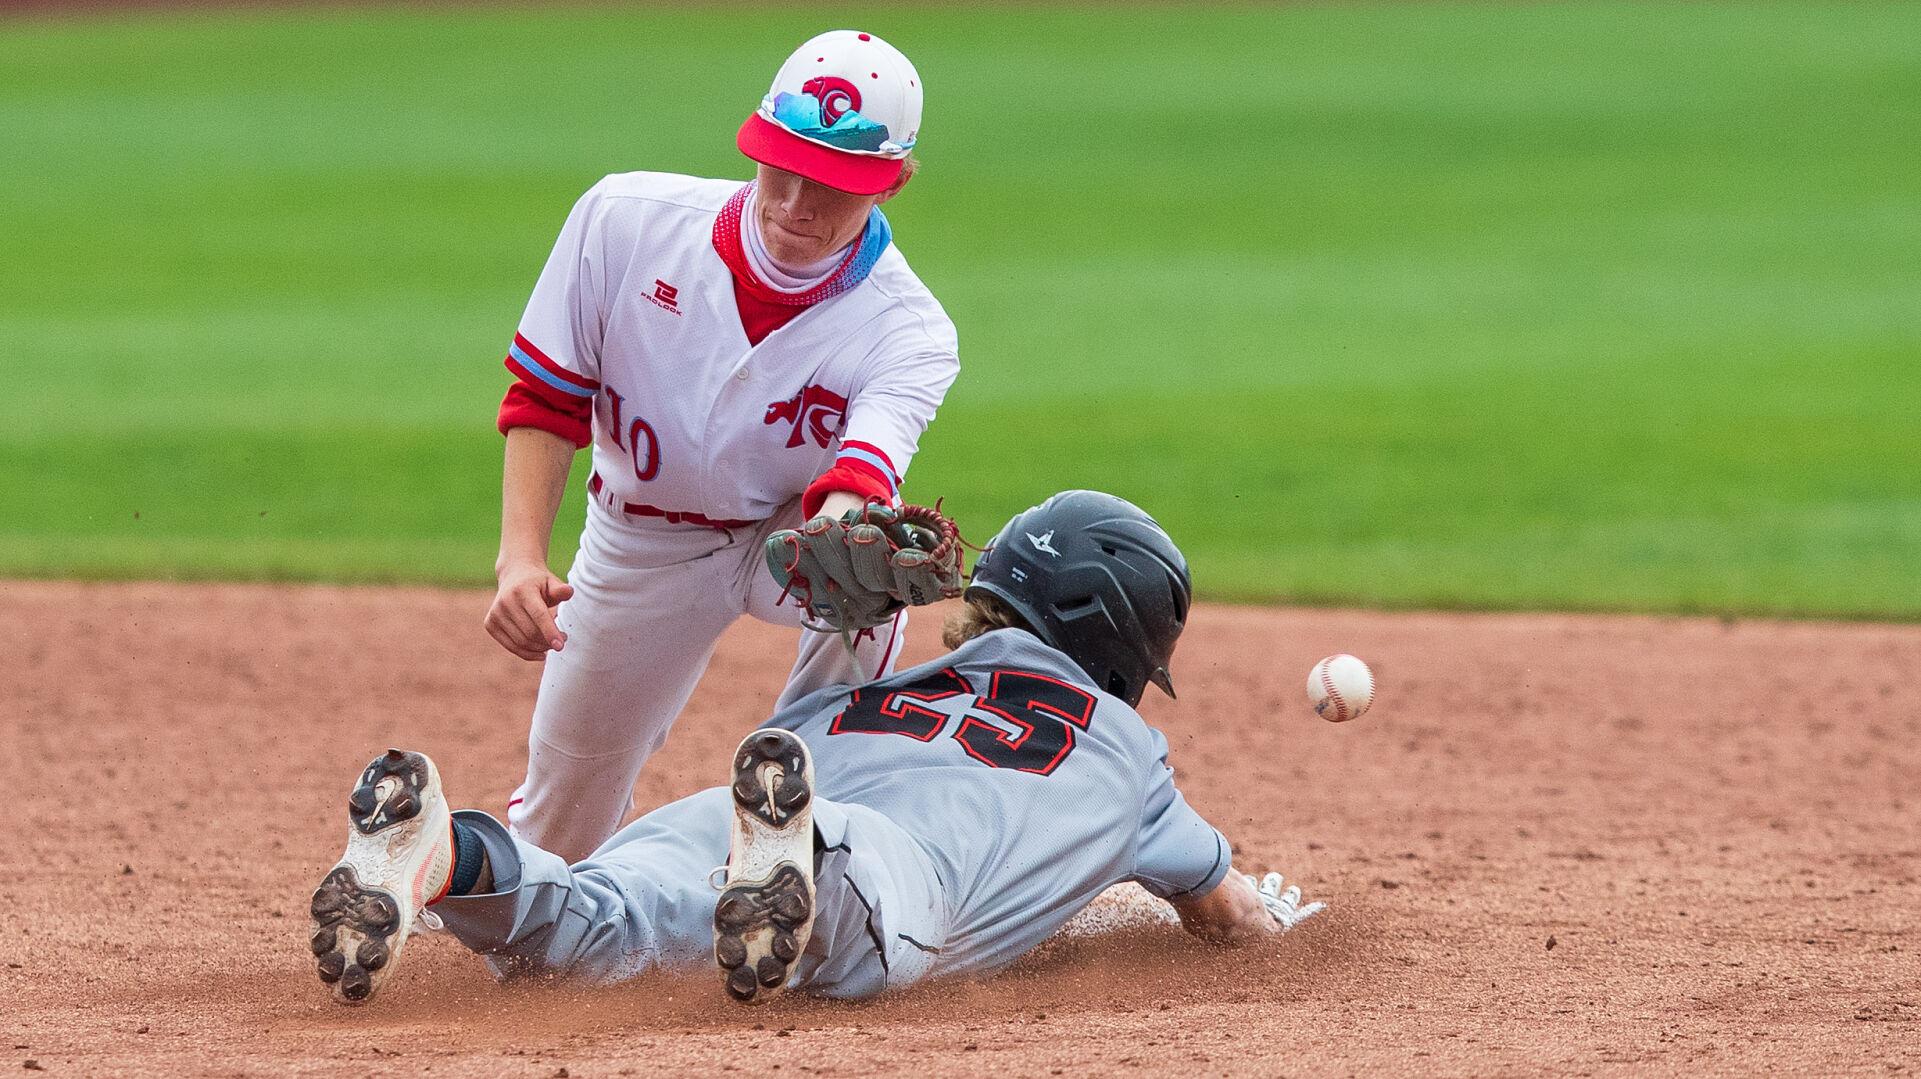 Previewing Tuesday's games at the Nebraska state baseball tournament